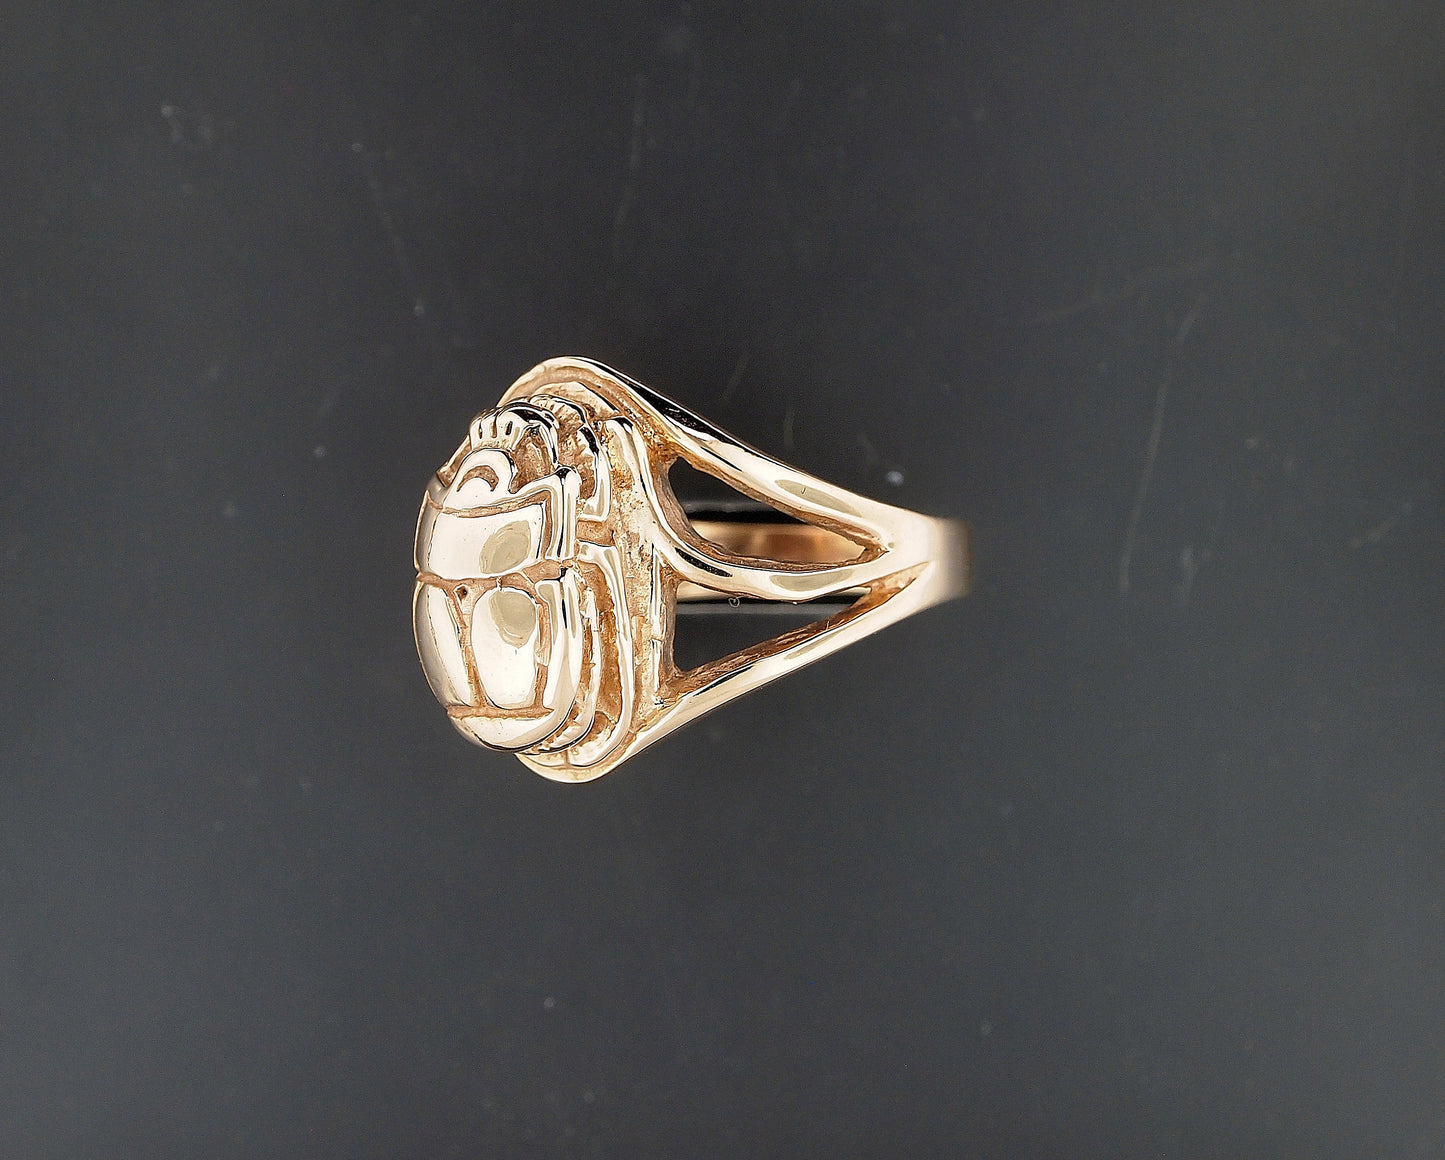 Egyptian Scarab Ring in Sterling Silver or Antique Bronze